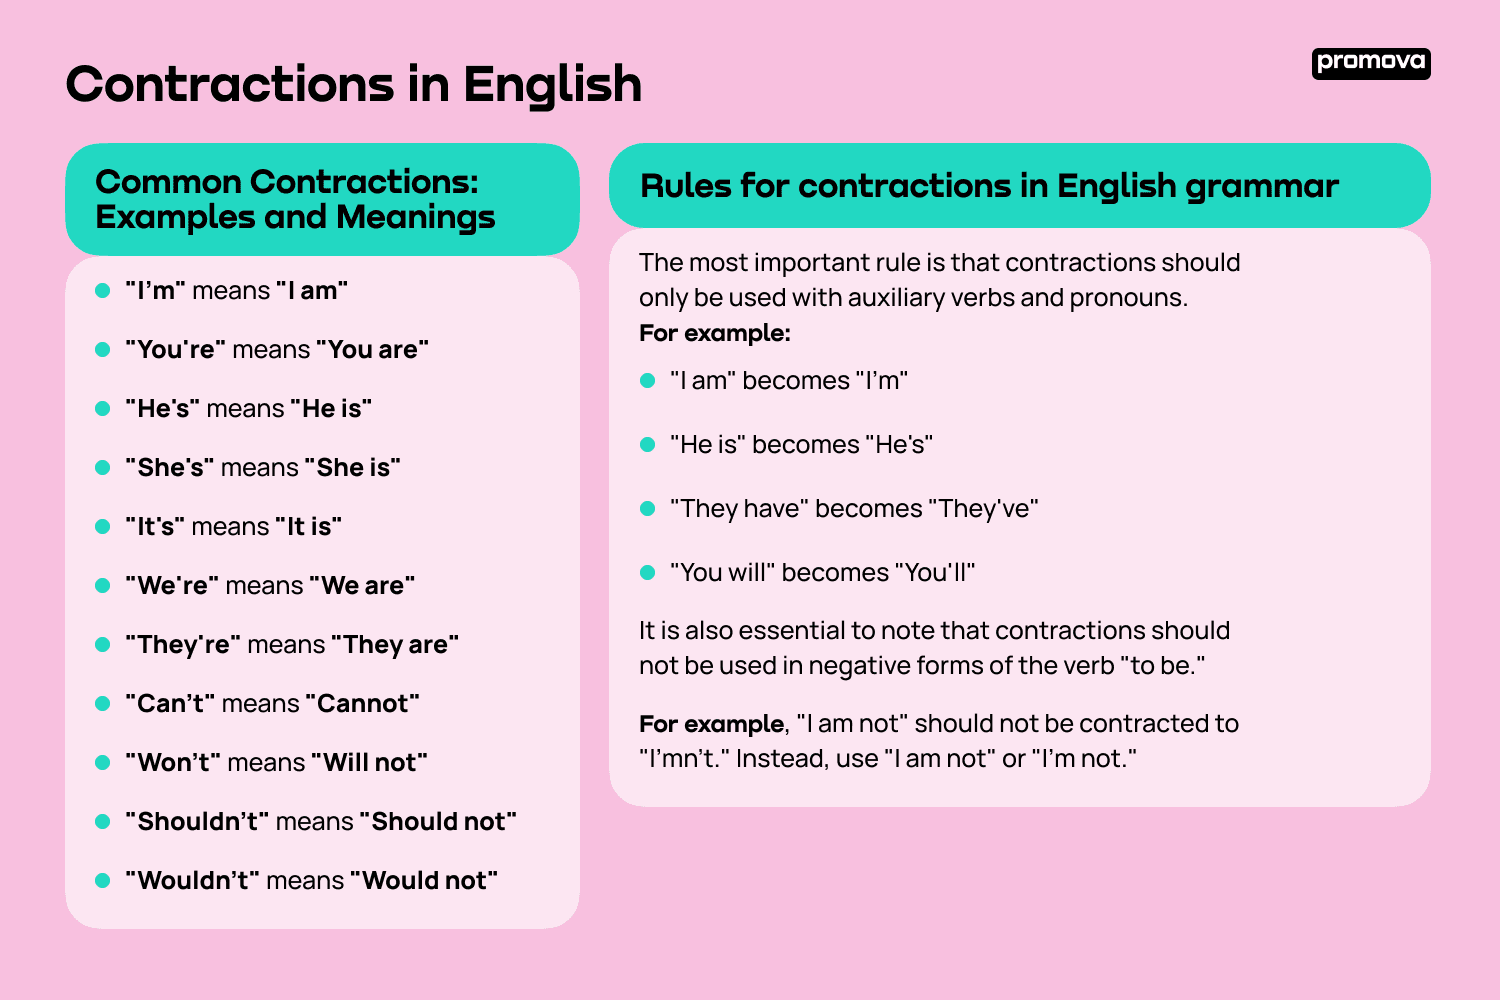 Common Contractions: Examples and Meanings